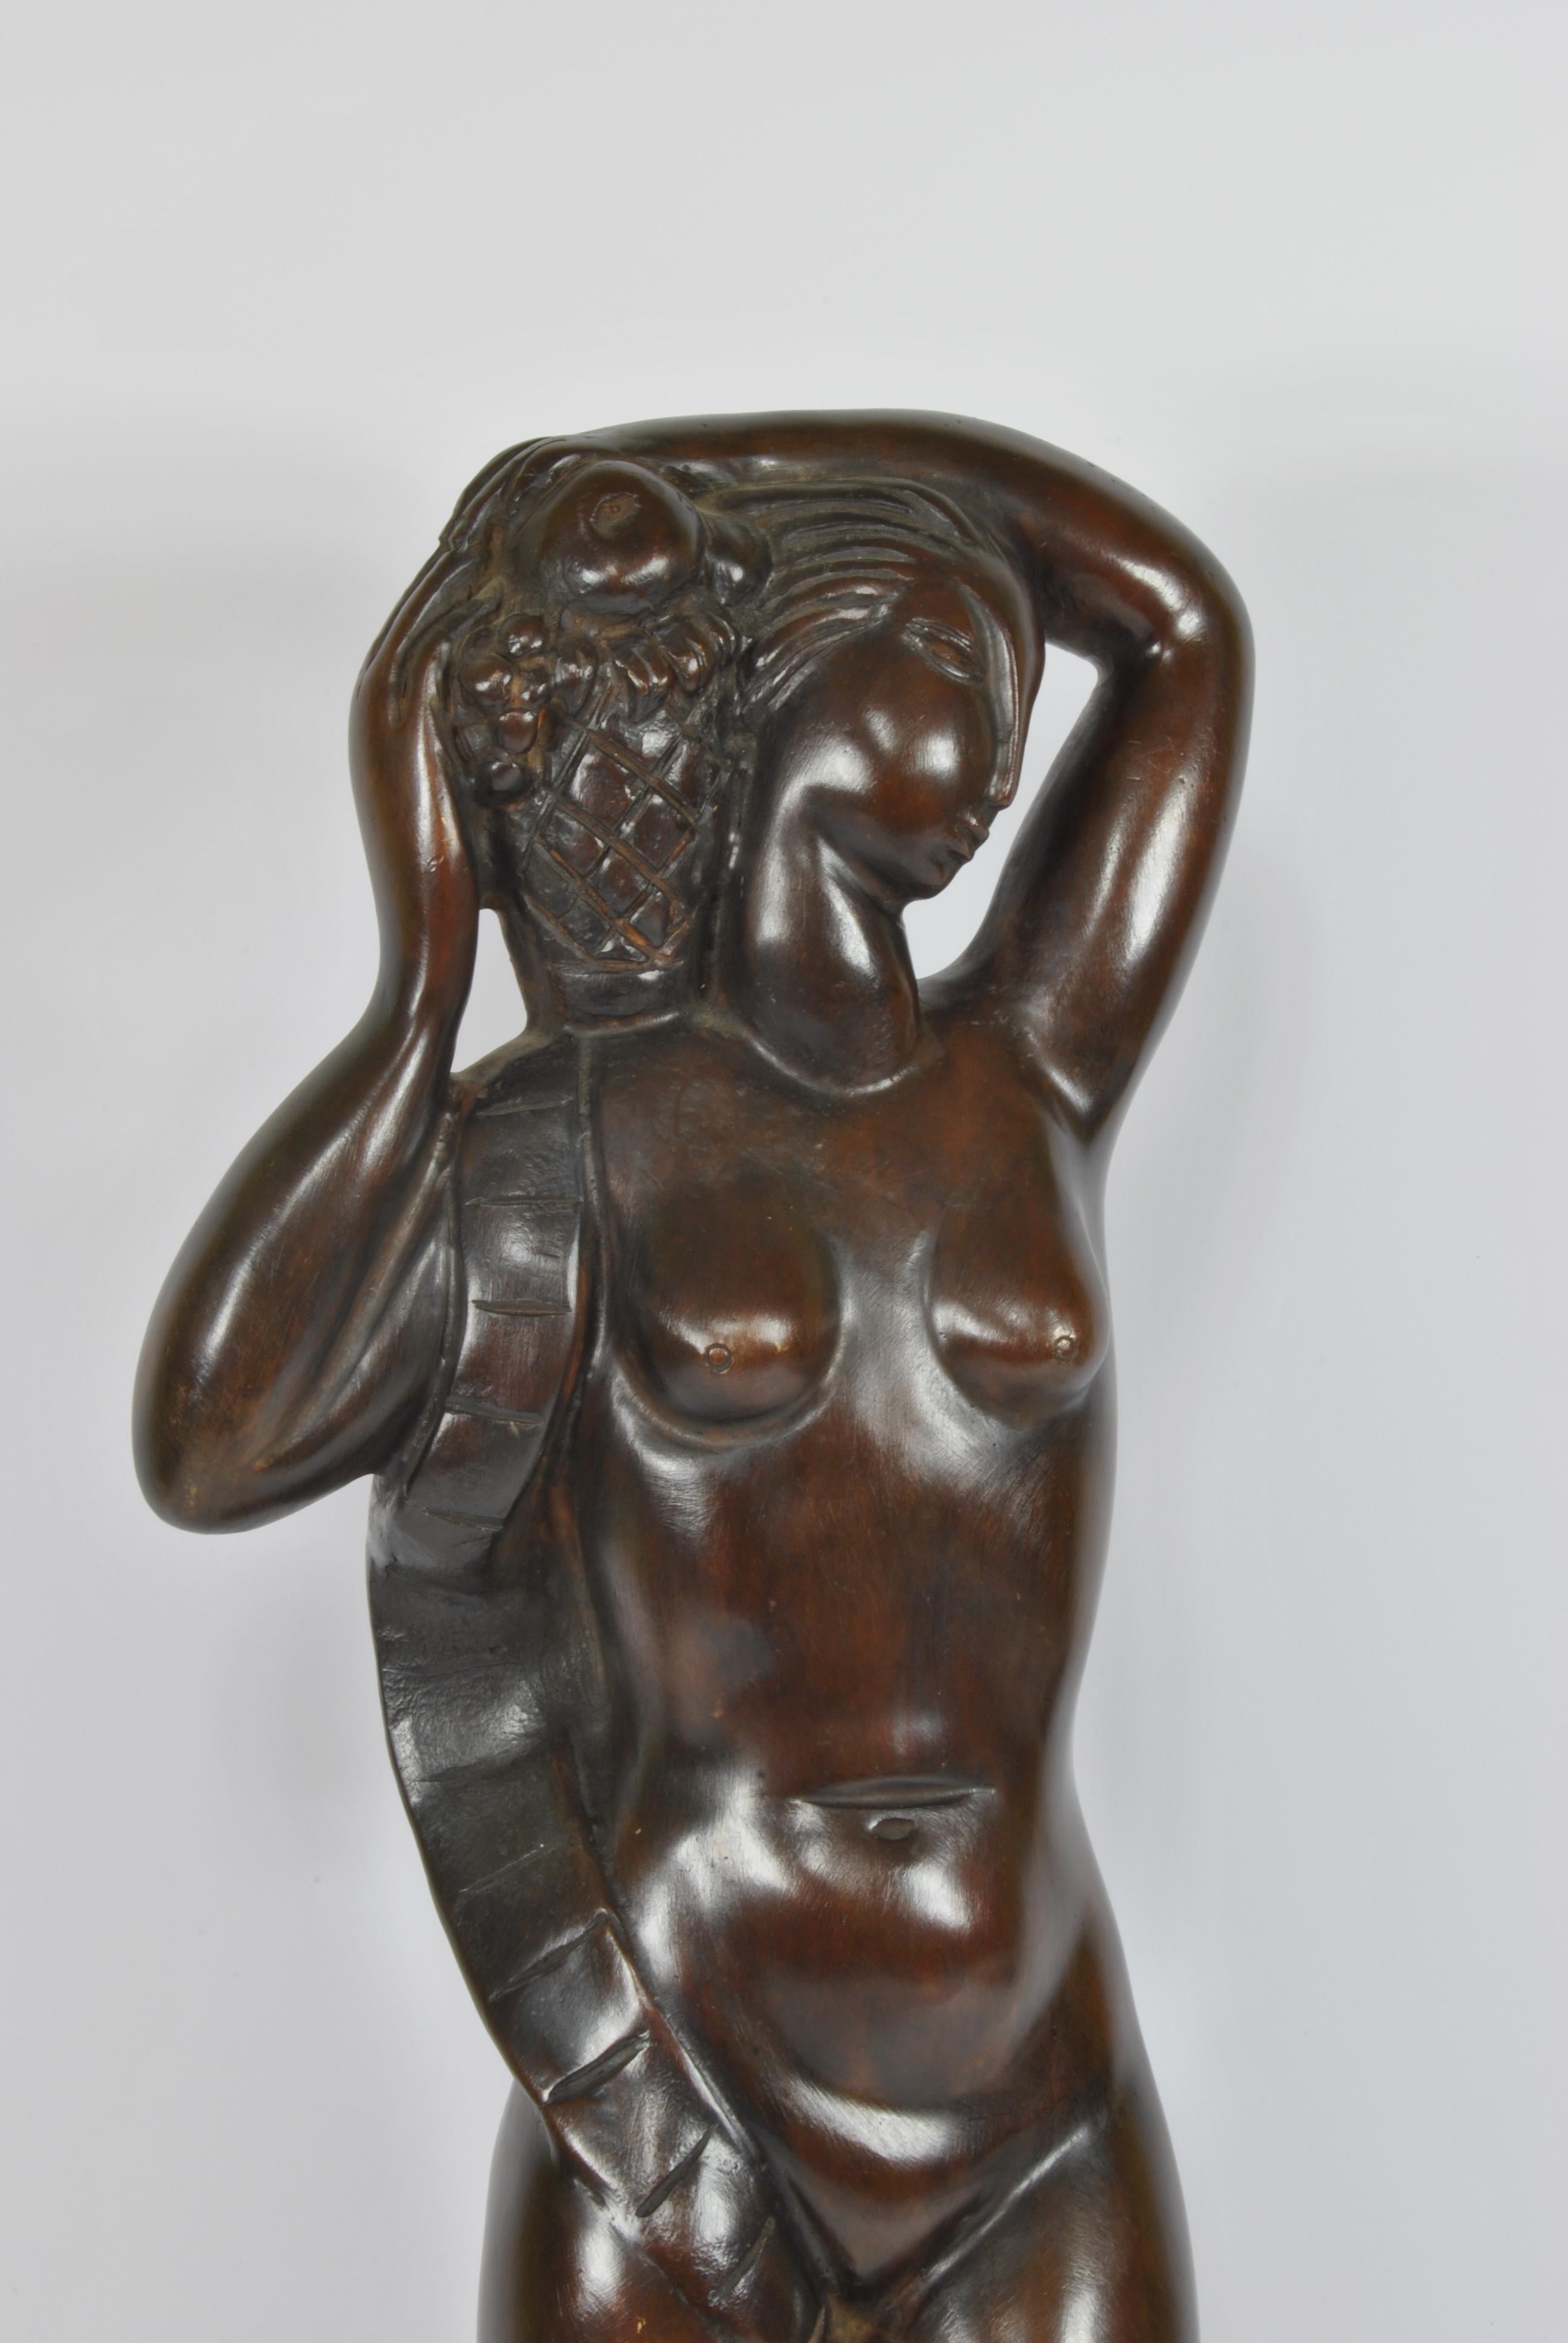 Mid-20th Century Art Deco Sculpture Entirely in Bronze, Signed by the Sculptor Celano France 1940 For Sale